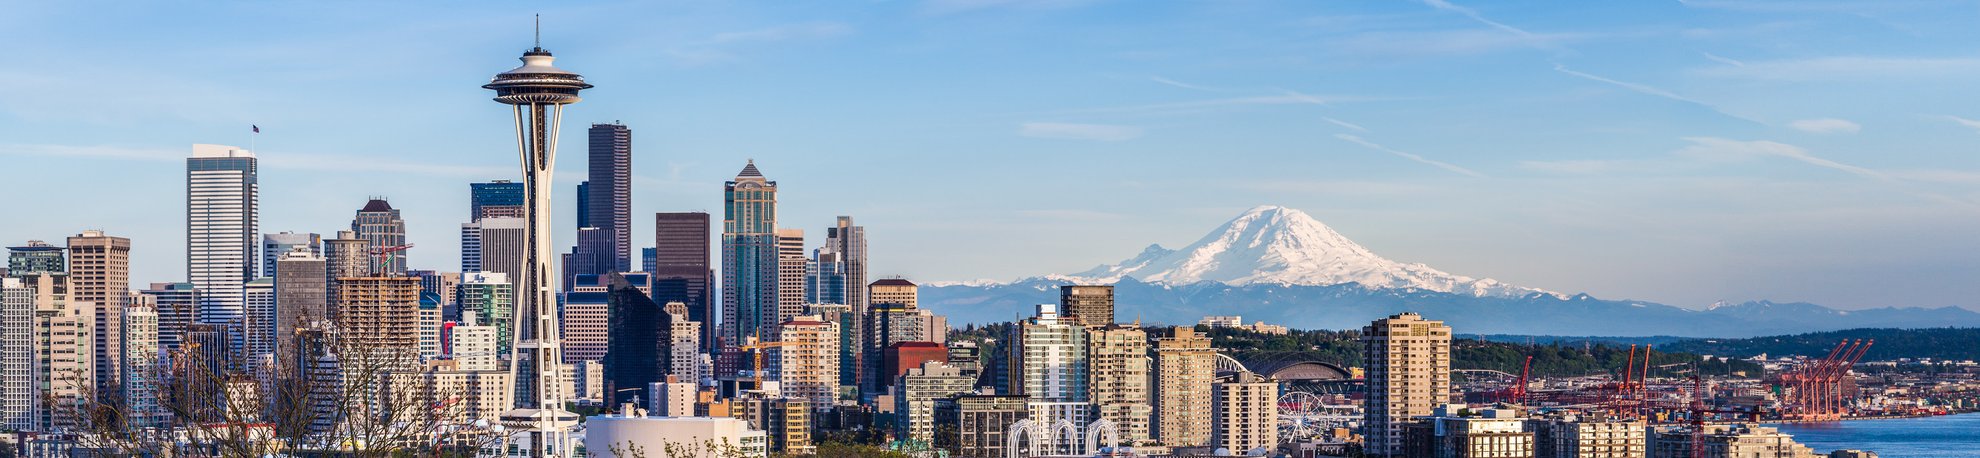 seattle header with space needle and mountain in the background